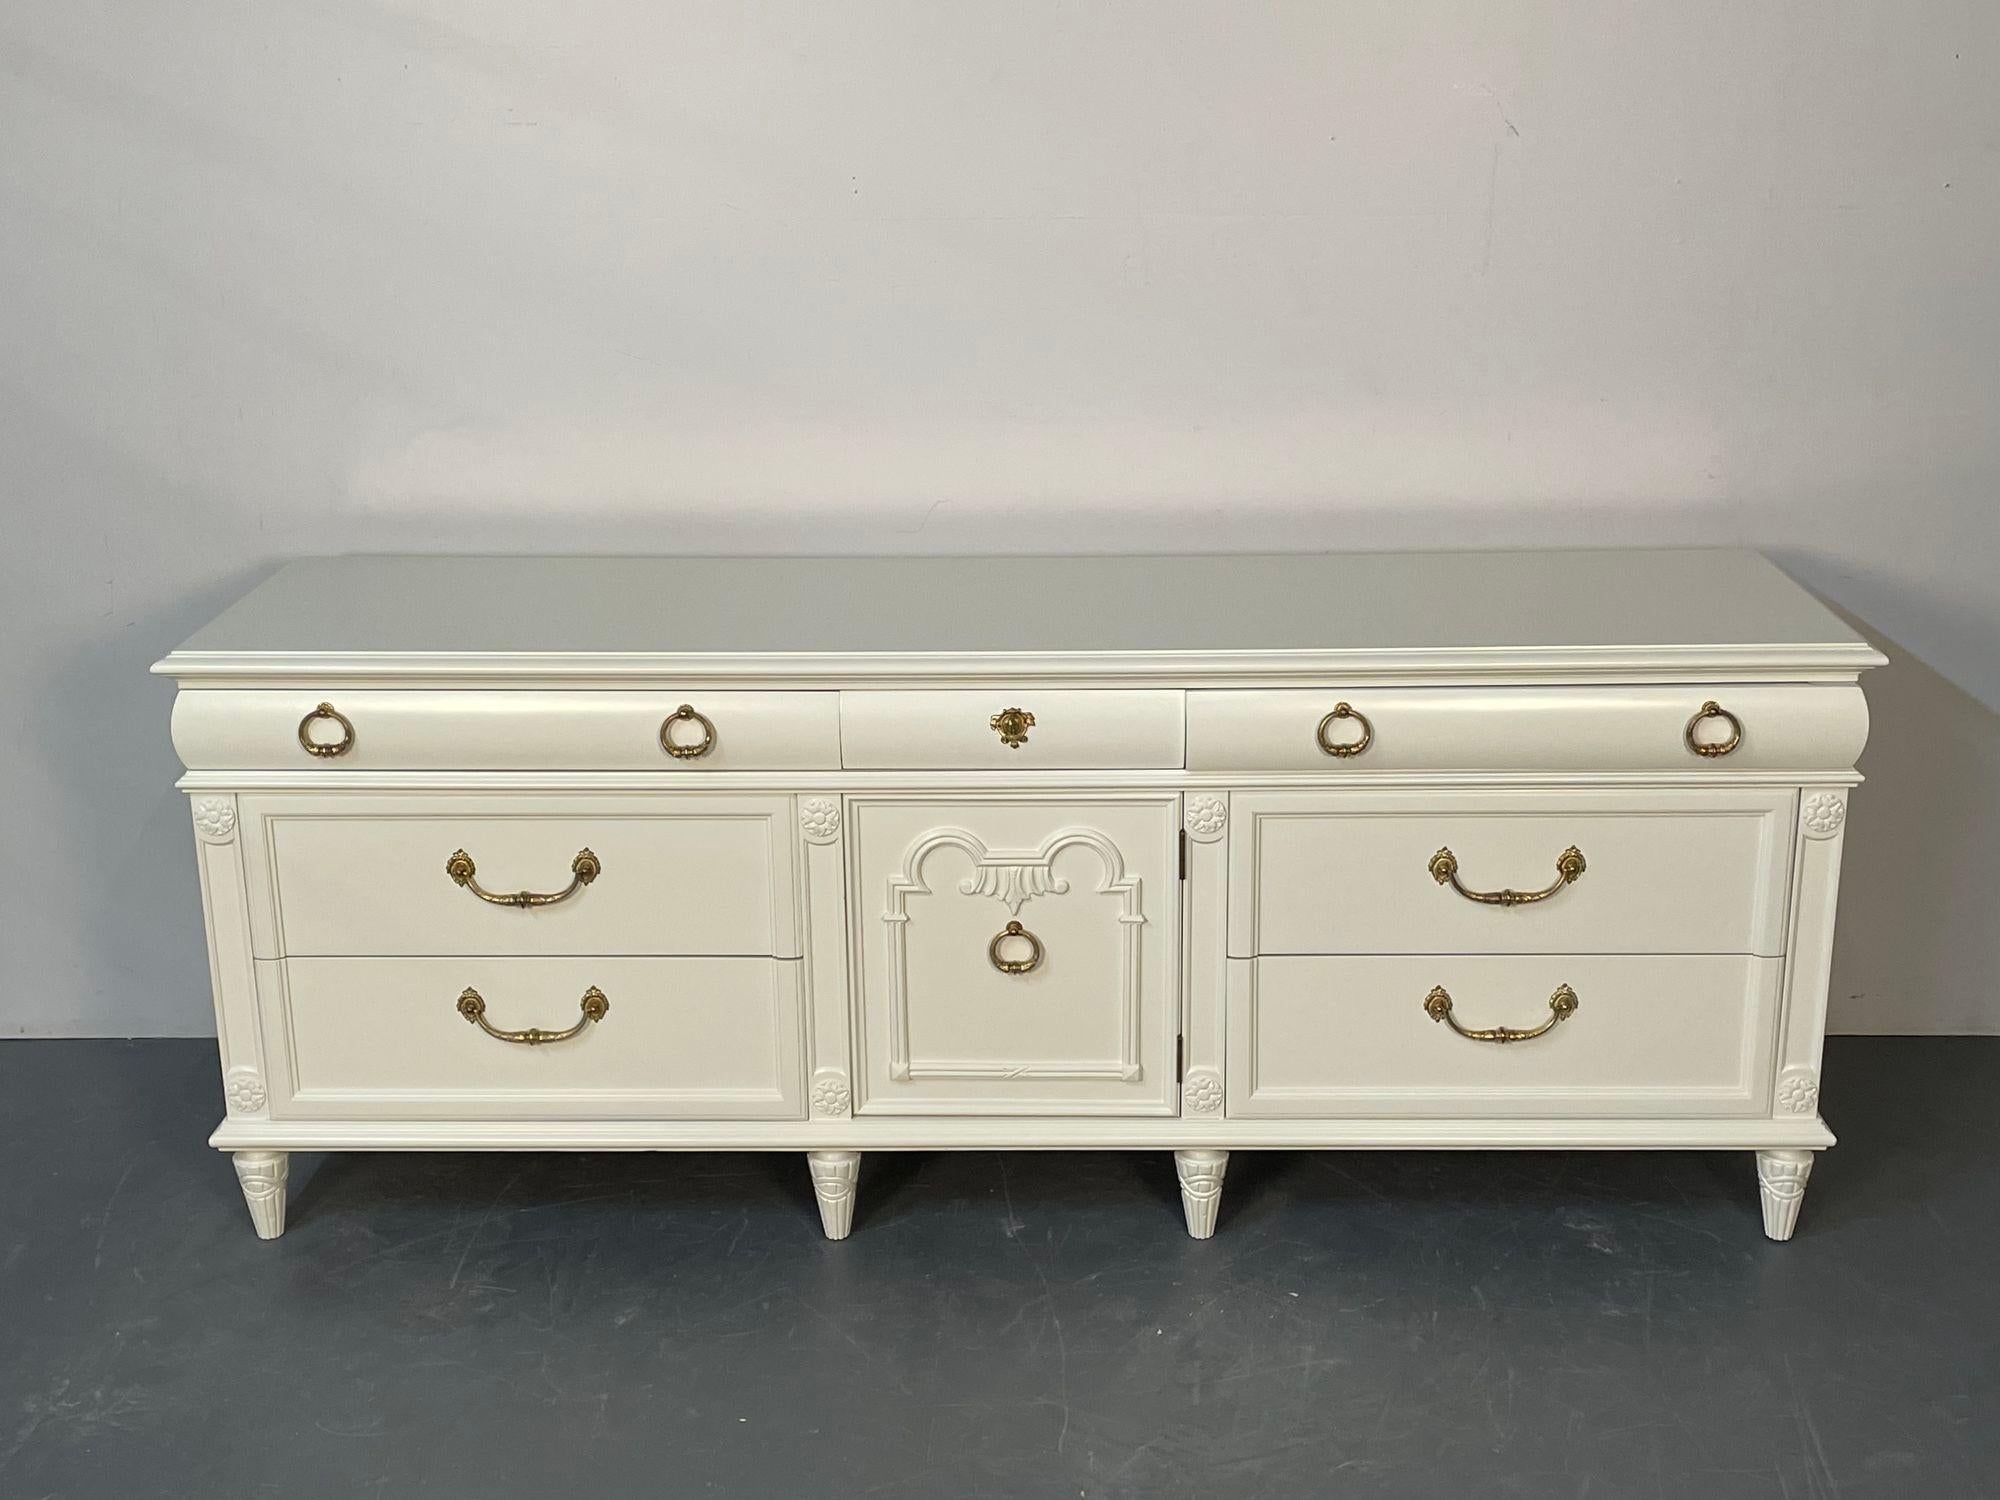 Louis XVI Style Painted Dresser, Mid-Century Modern, Commode, Bronze, Off White
 
An off linen white professionally refinished double chest or dresser. A finely crafted solid wood chest from the 1940s with stunning bronze cast drawer pulls. The